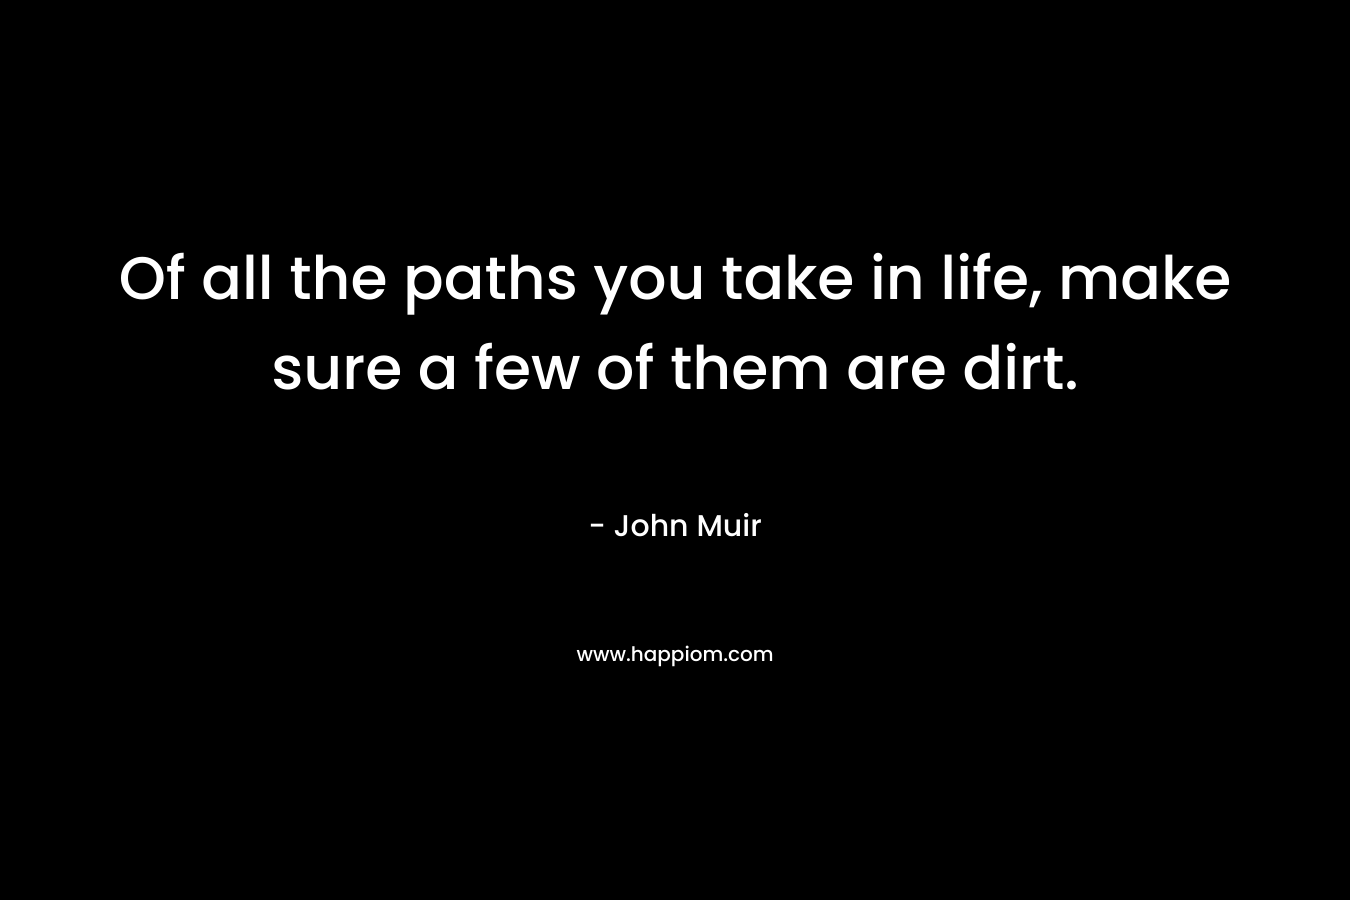 Of all the paths you take in life, make sure a few of them are dirt.